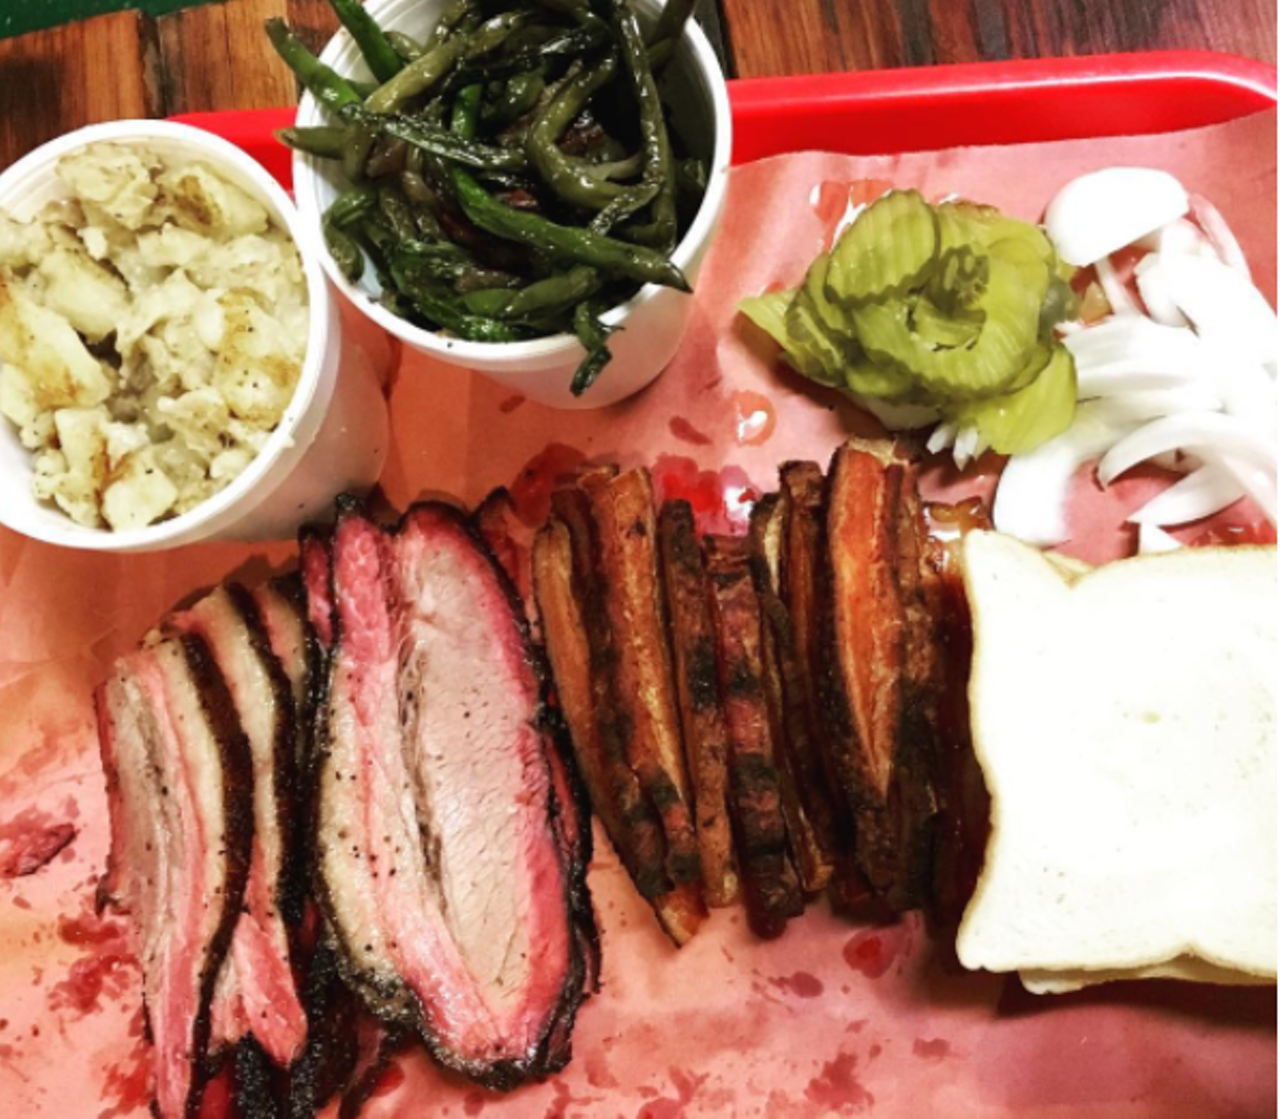 Burnt Ends
The barbecue spot vacated its Blanco Road location at the end of January. A February Facebook post indicated Burnt Ends would set up shop somewhere else, but has yet to do so at year’s end.
Photo via  Instagram / burntendssa